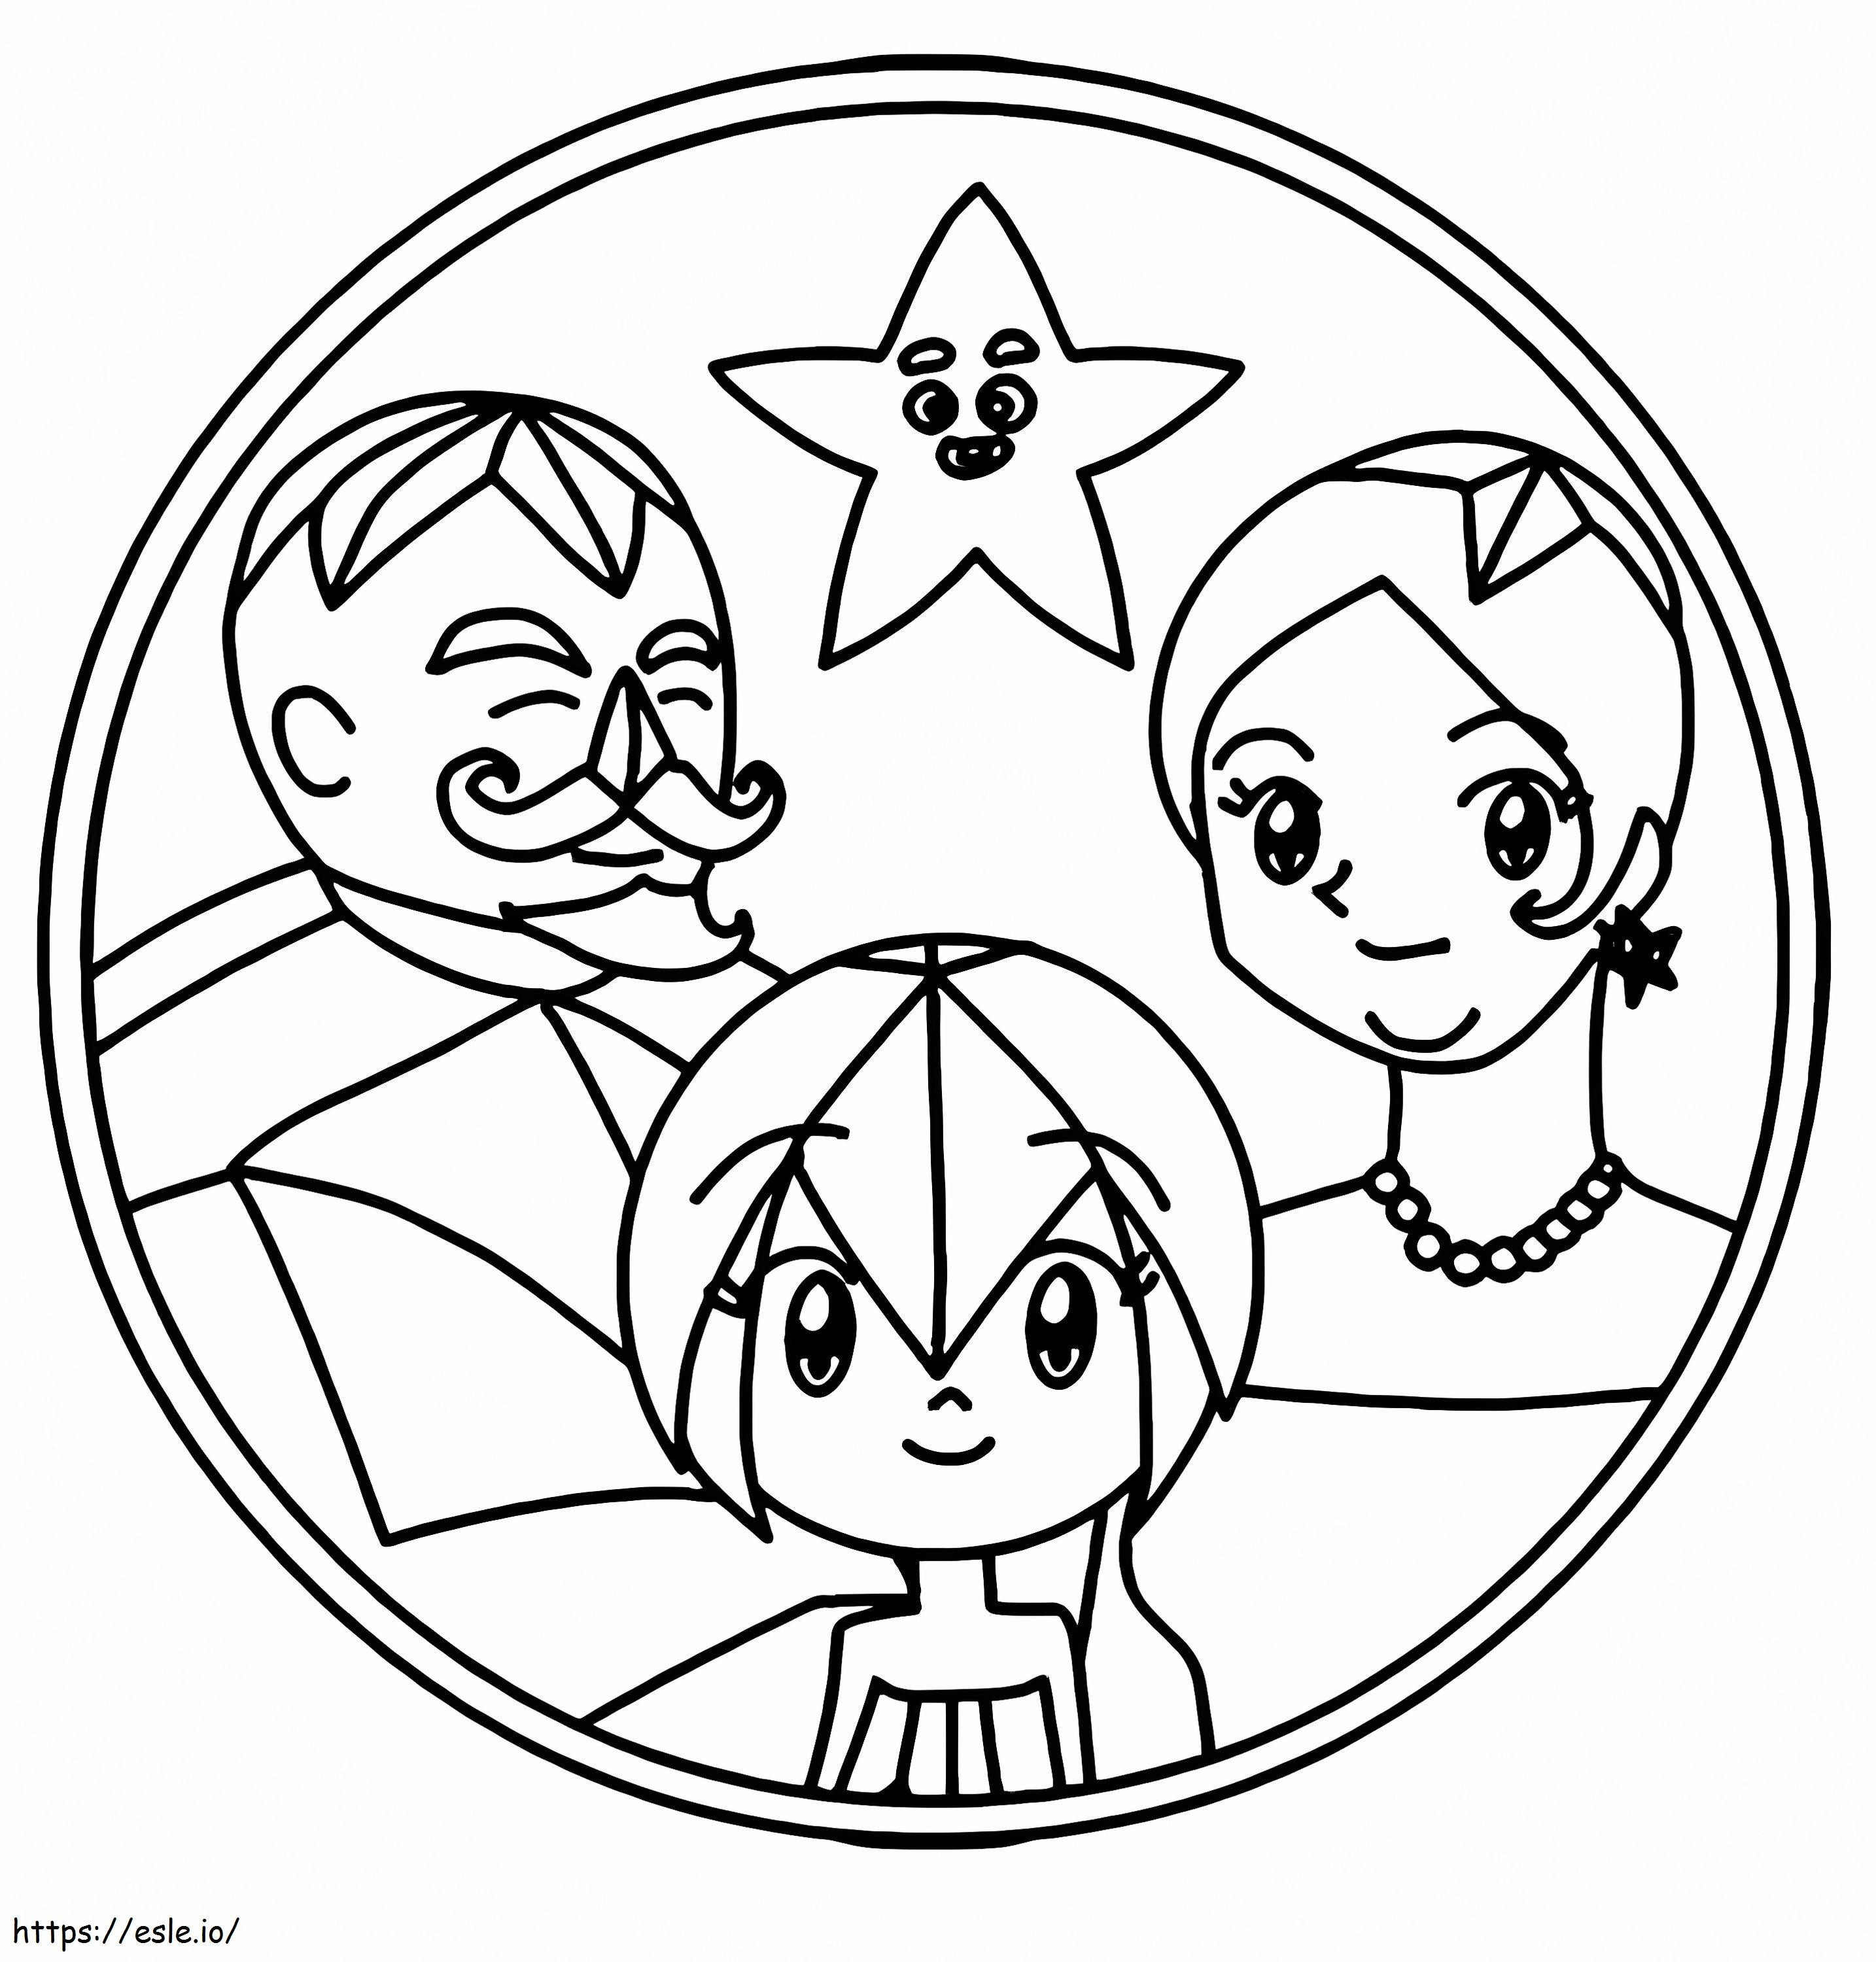 Ester Family coloring page